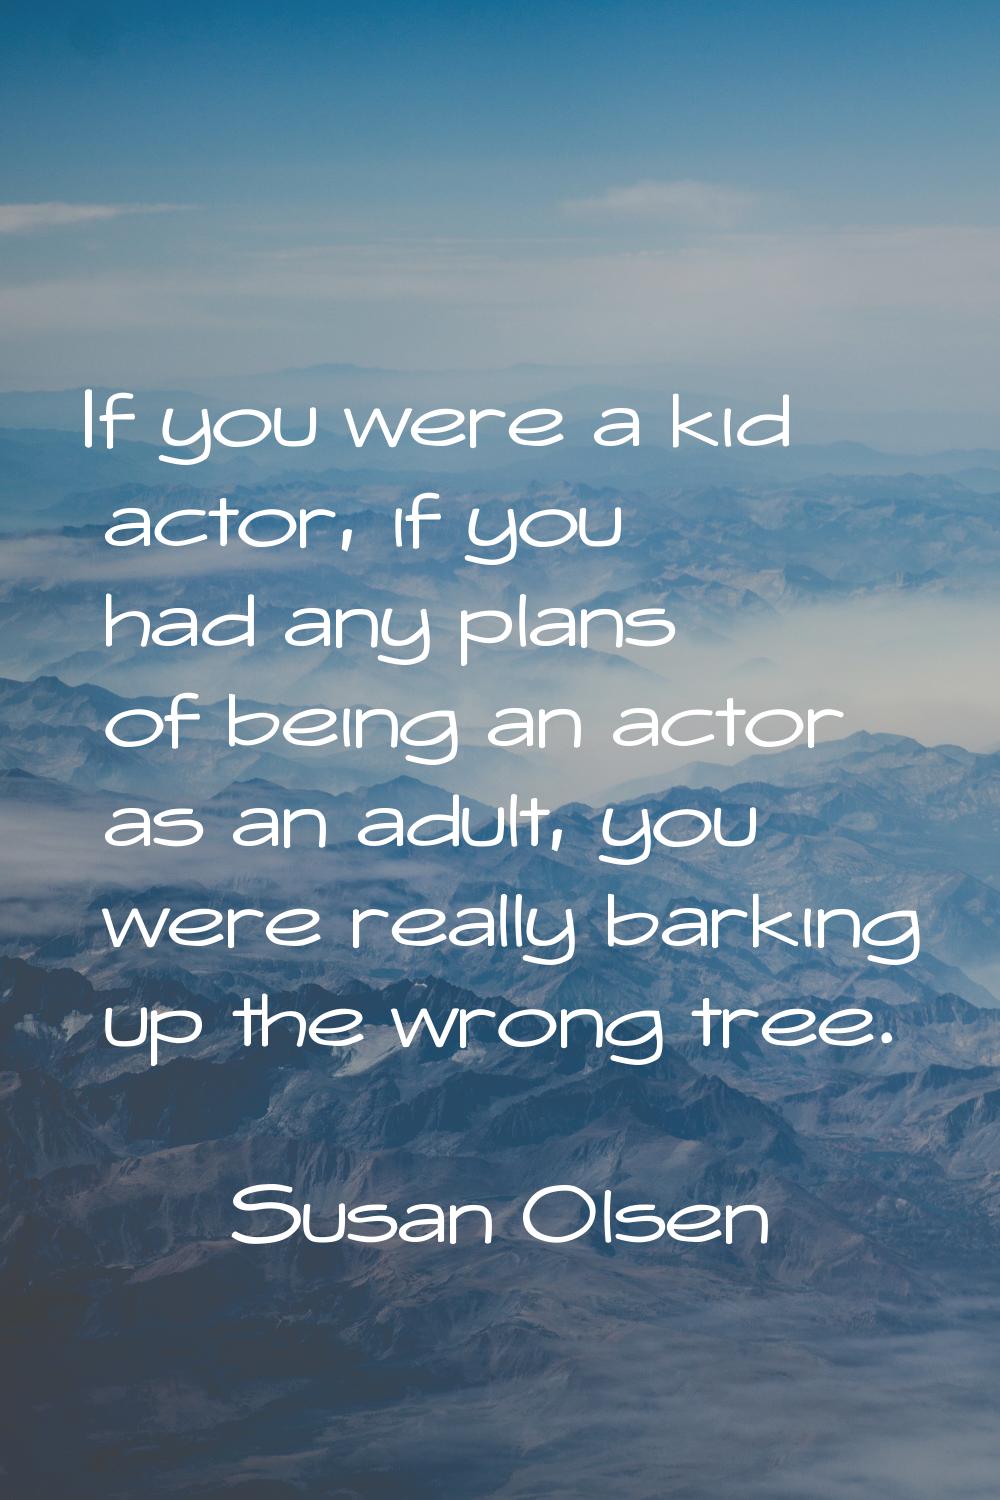 If you were a kid actor, if you had any plans of being an actor as an adult, you were really barkin